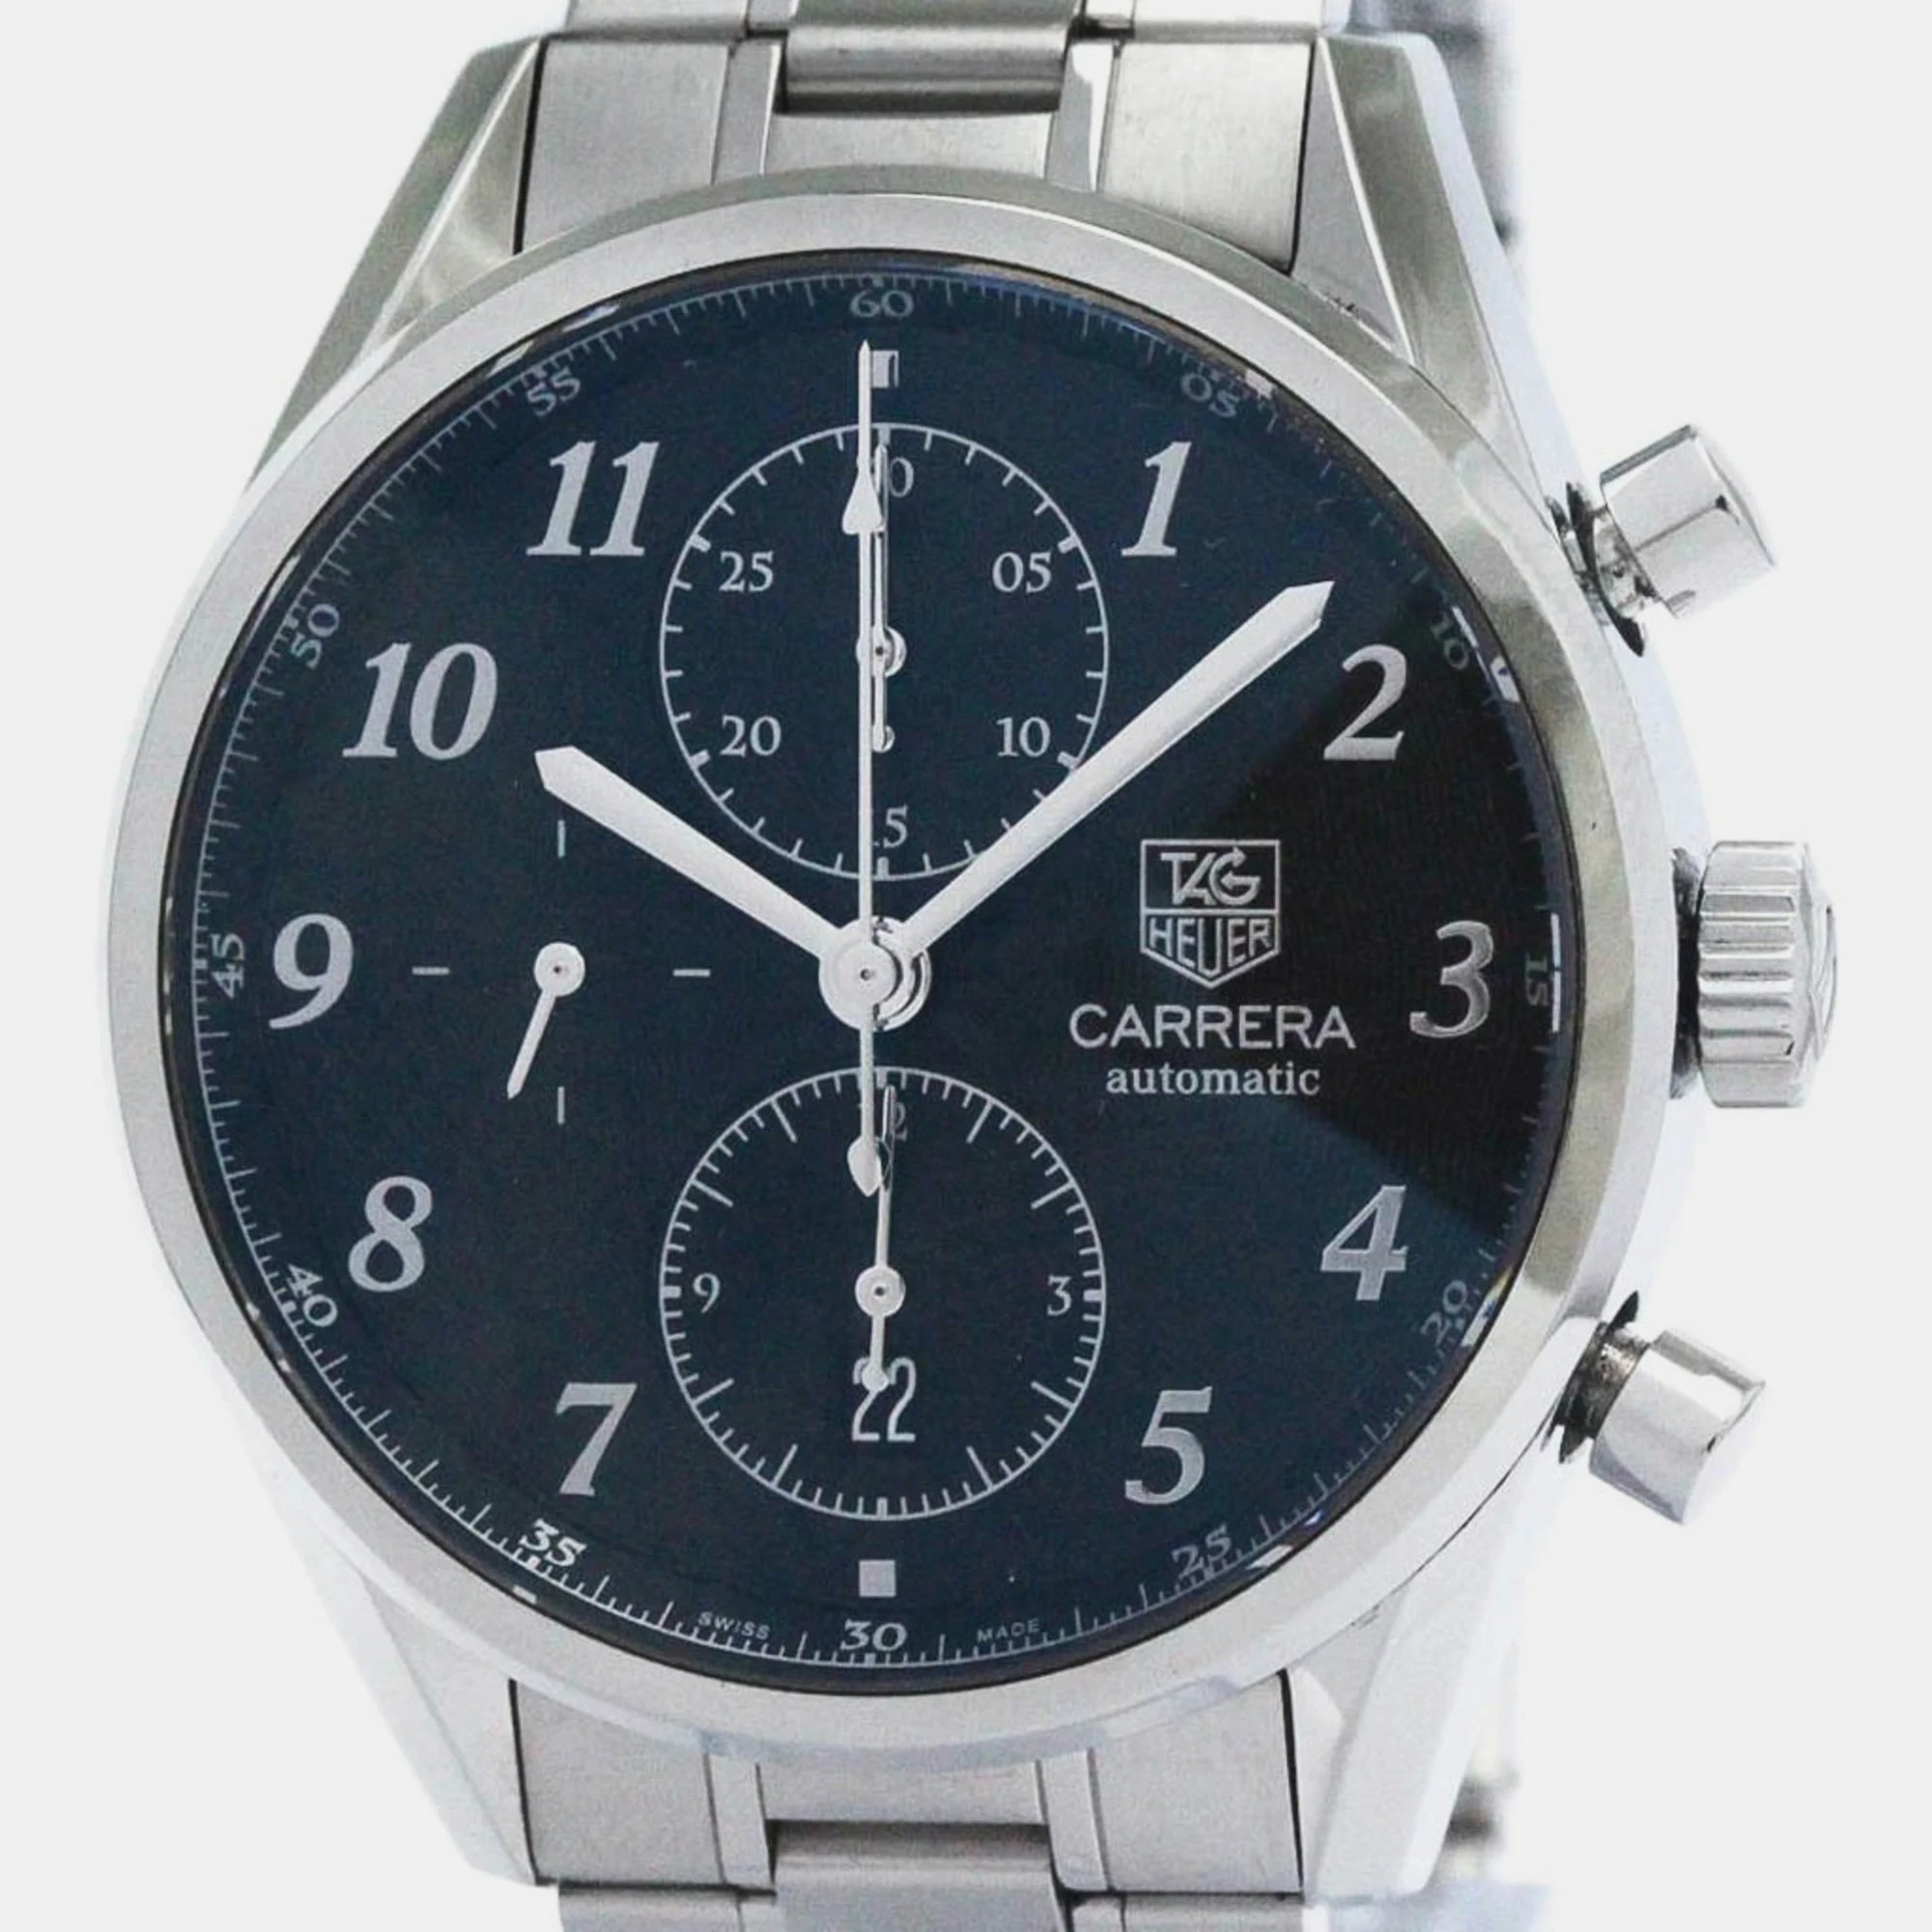 Pre-owned Tag Heuer Black Stainless Steel Carrera Cas2110 Automatic Men's Wristwatch 41 Mm